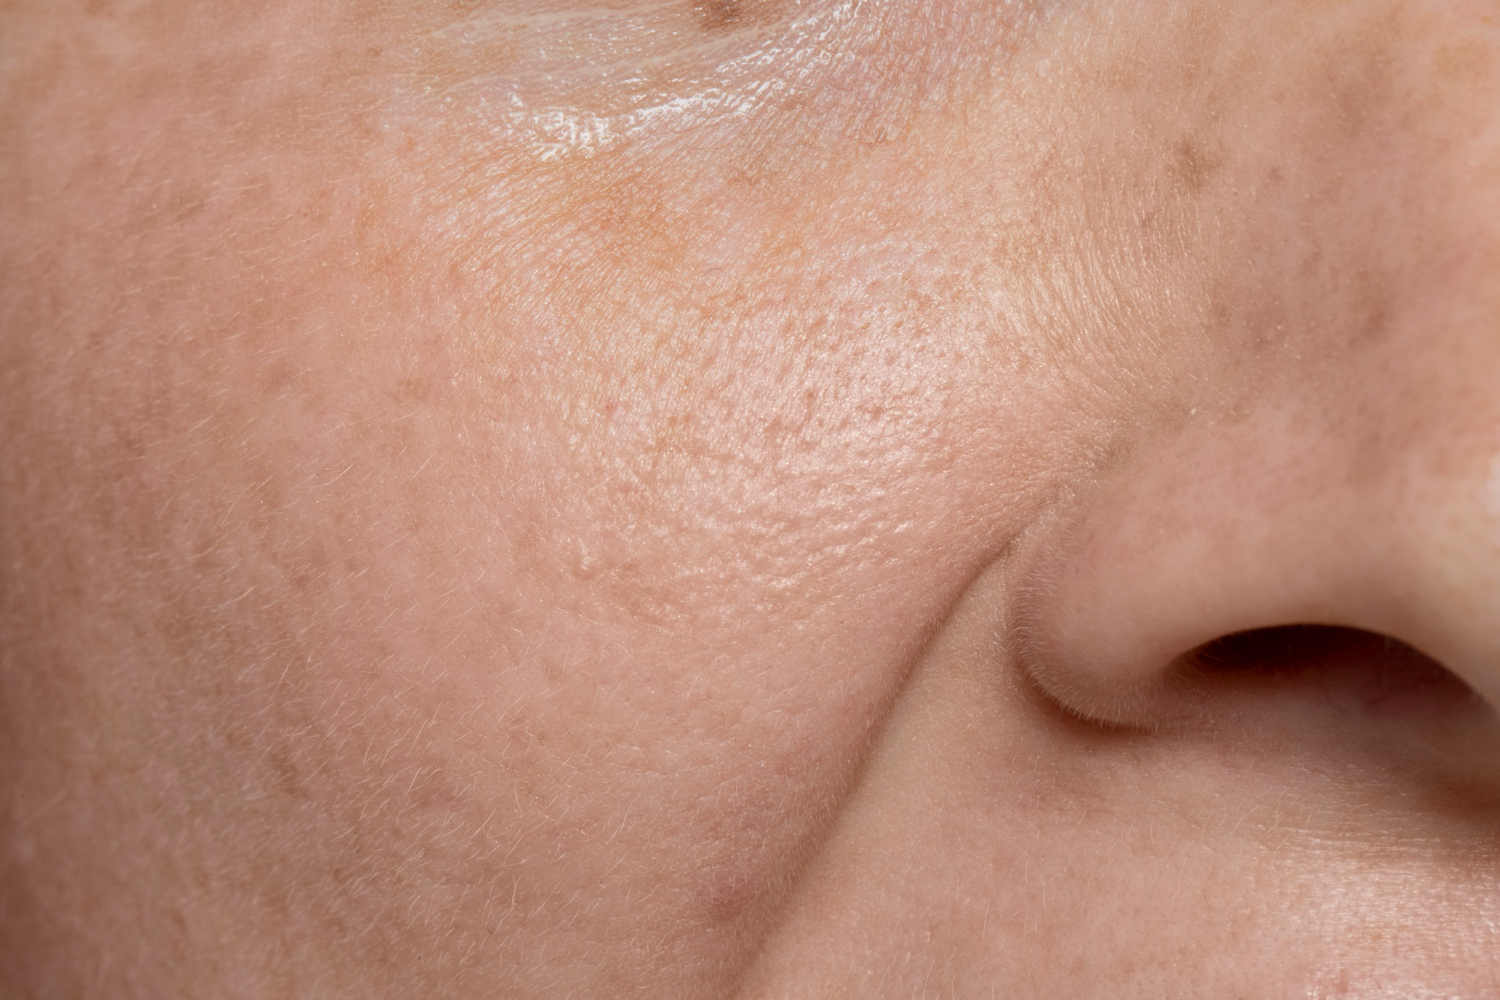 Close up on face pores texture